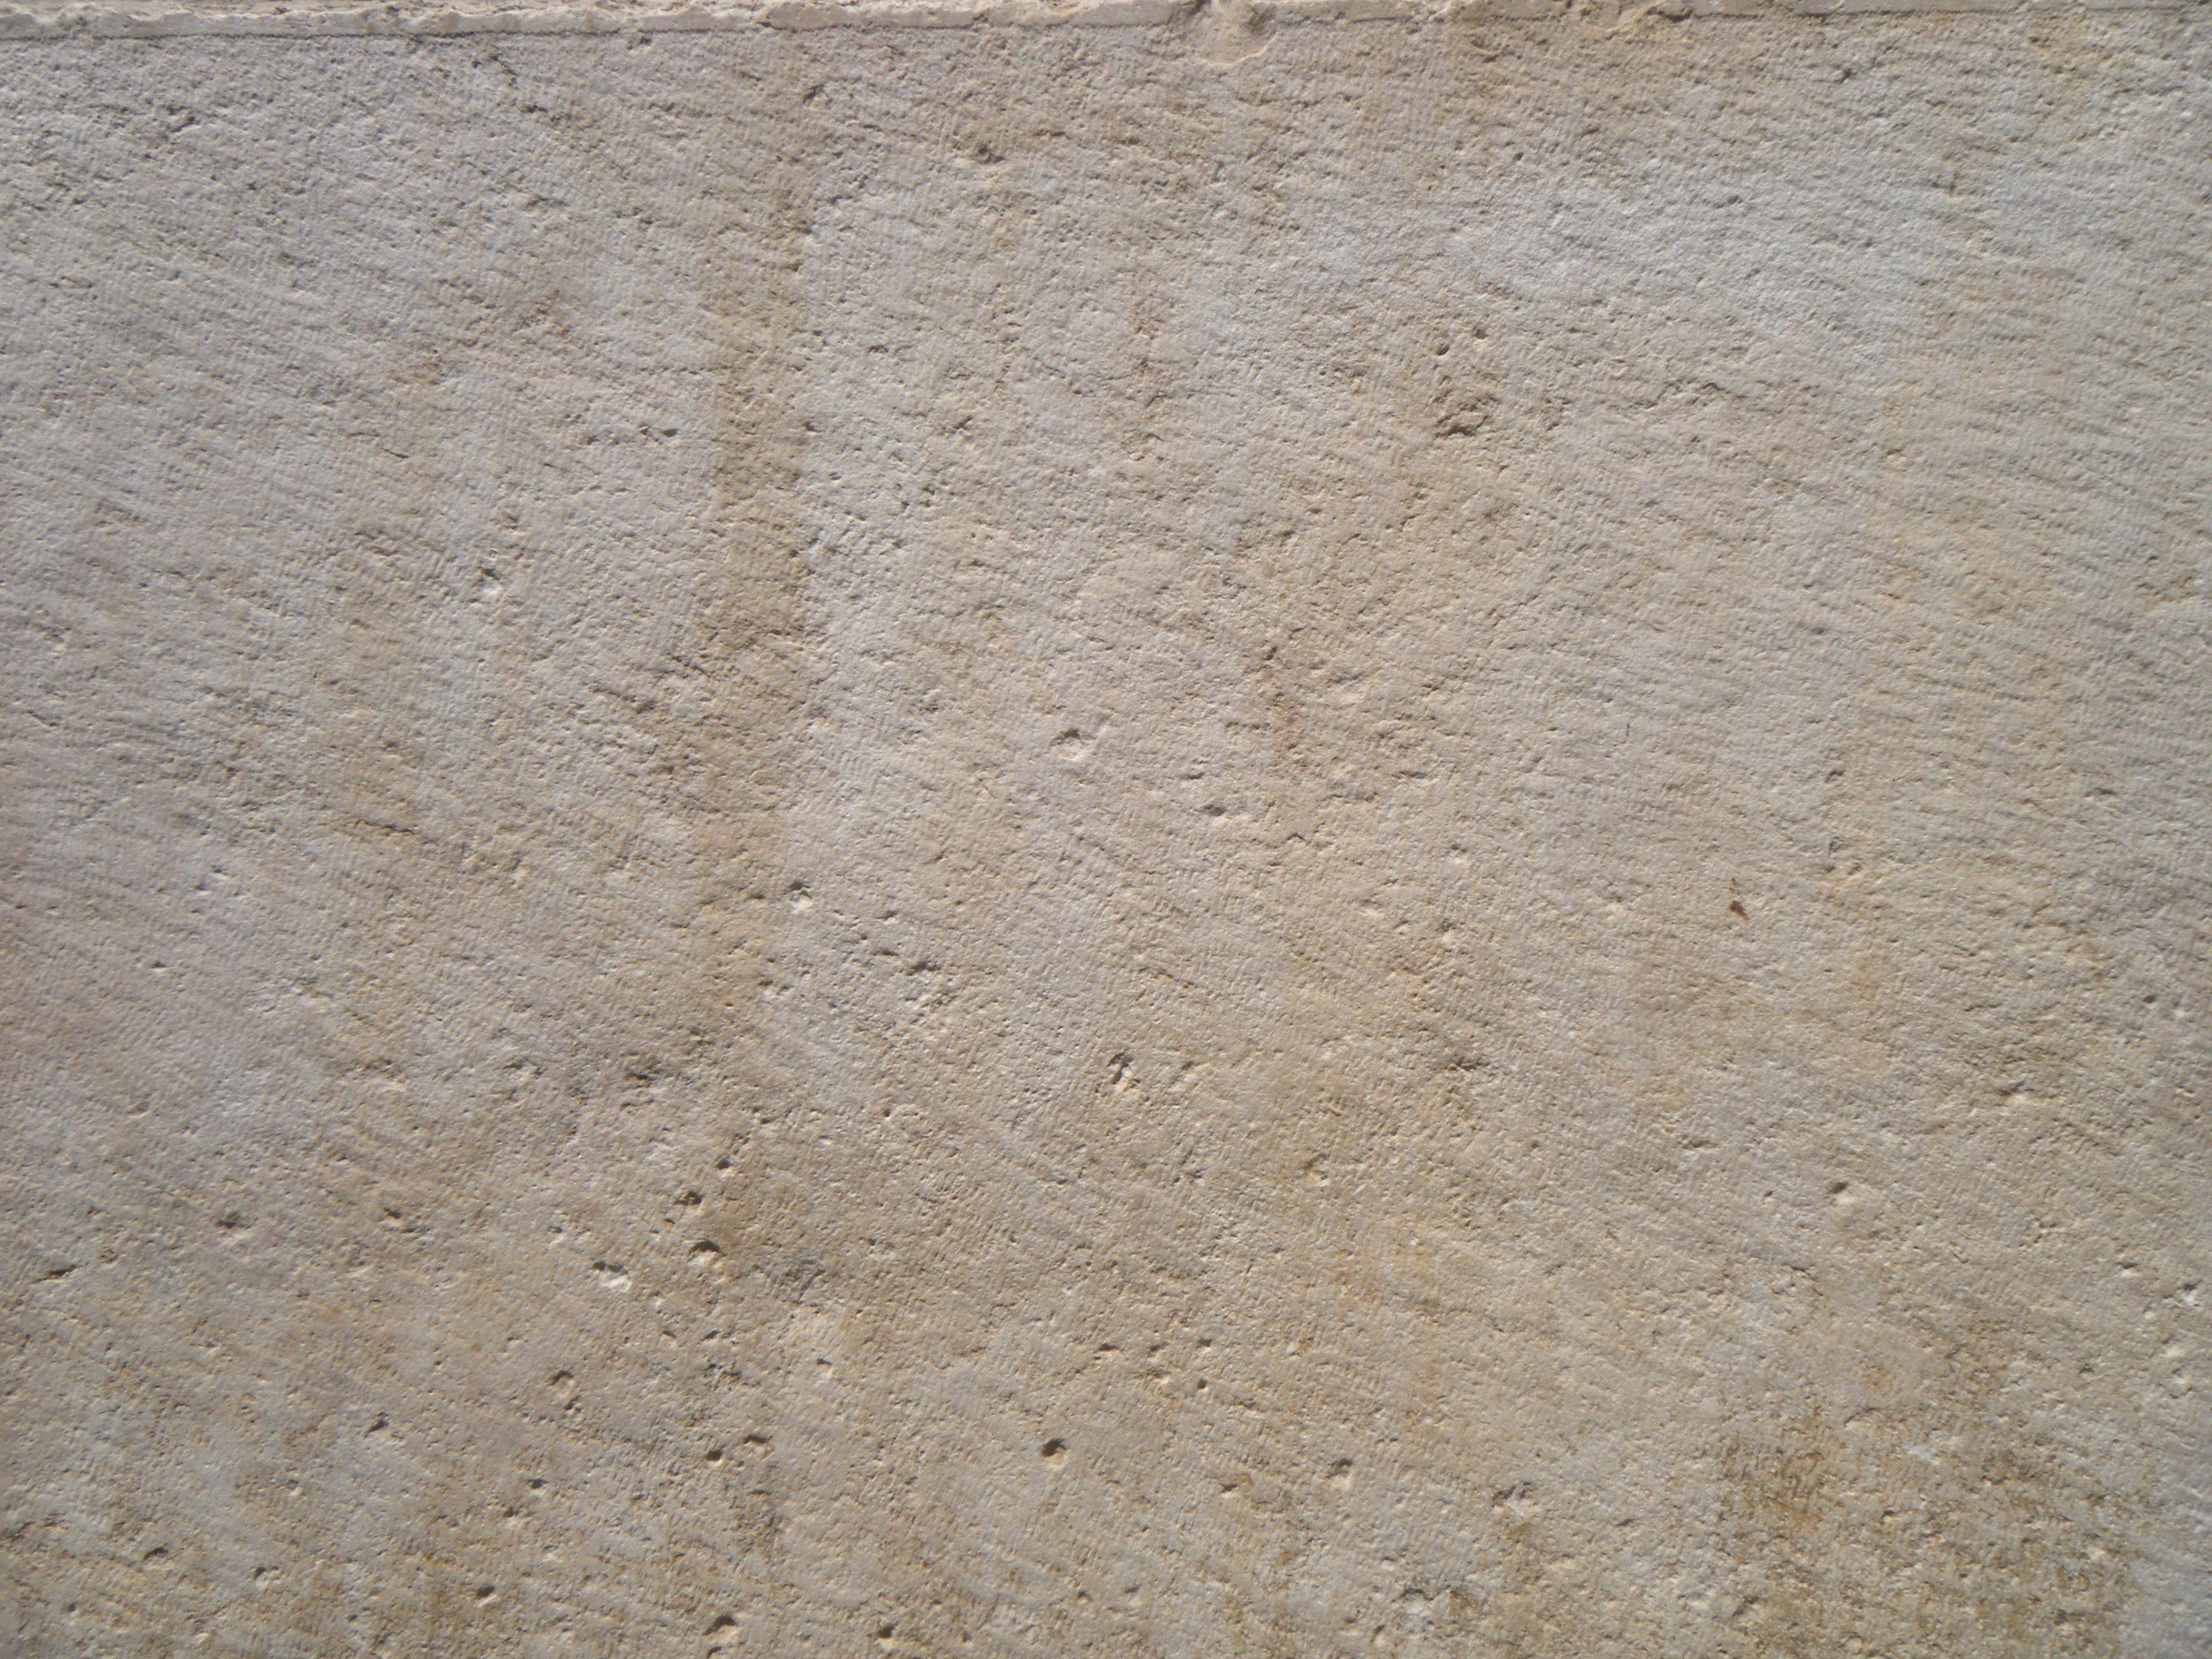 Texture - medieval stone blocks surface from athen 6 - Stone Surface ...